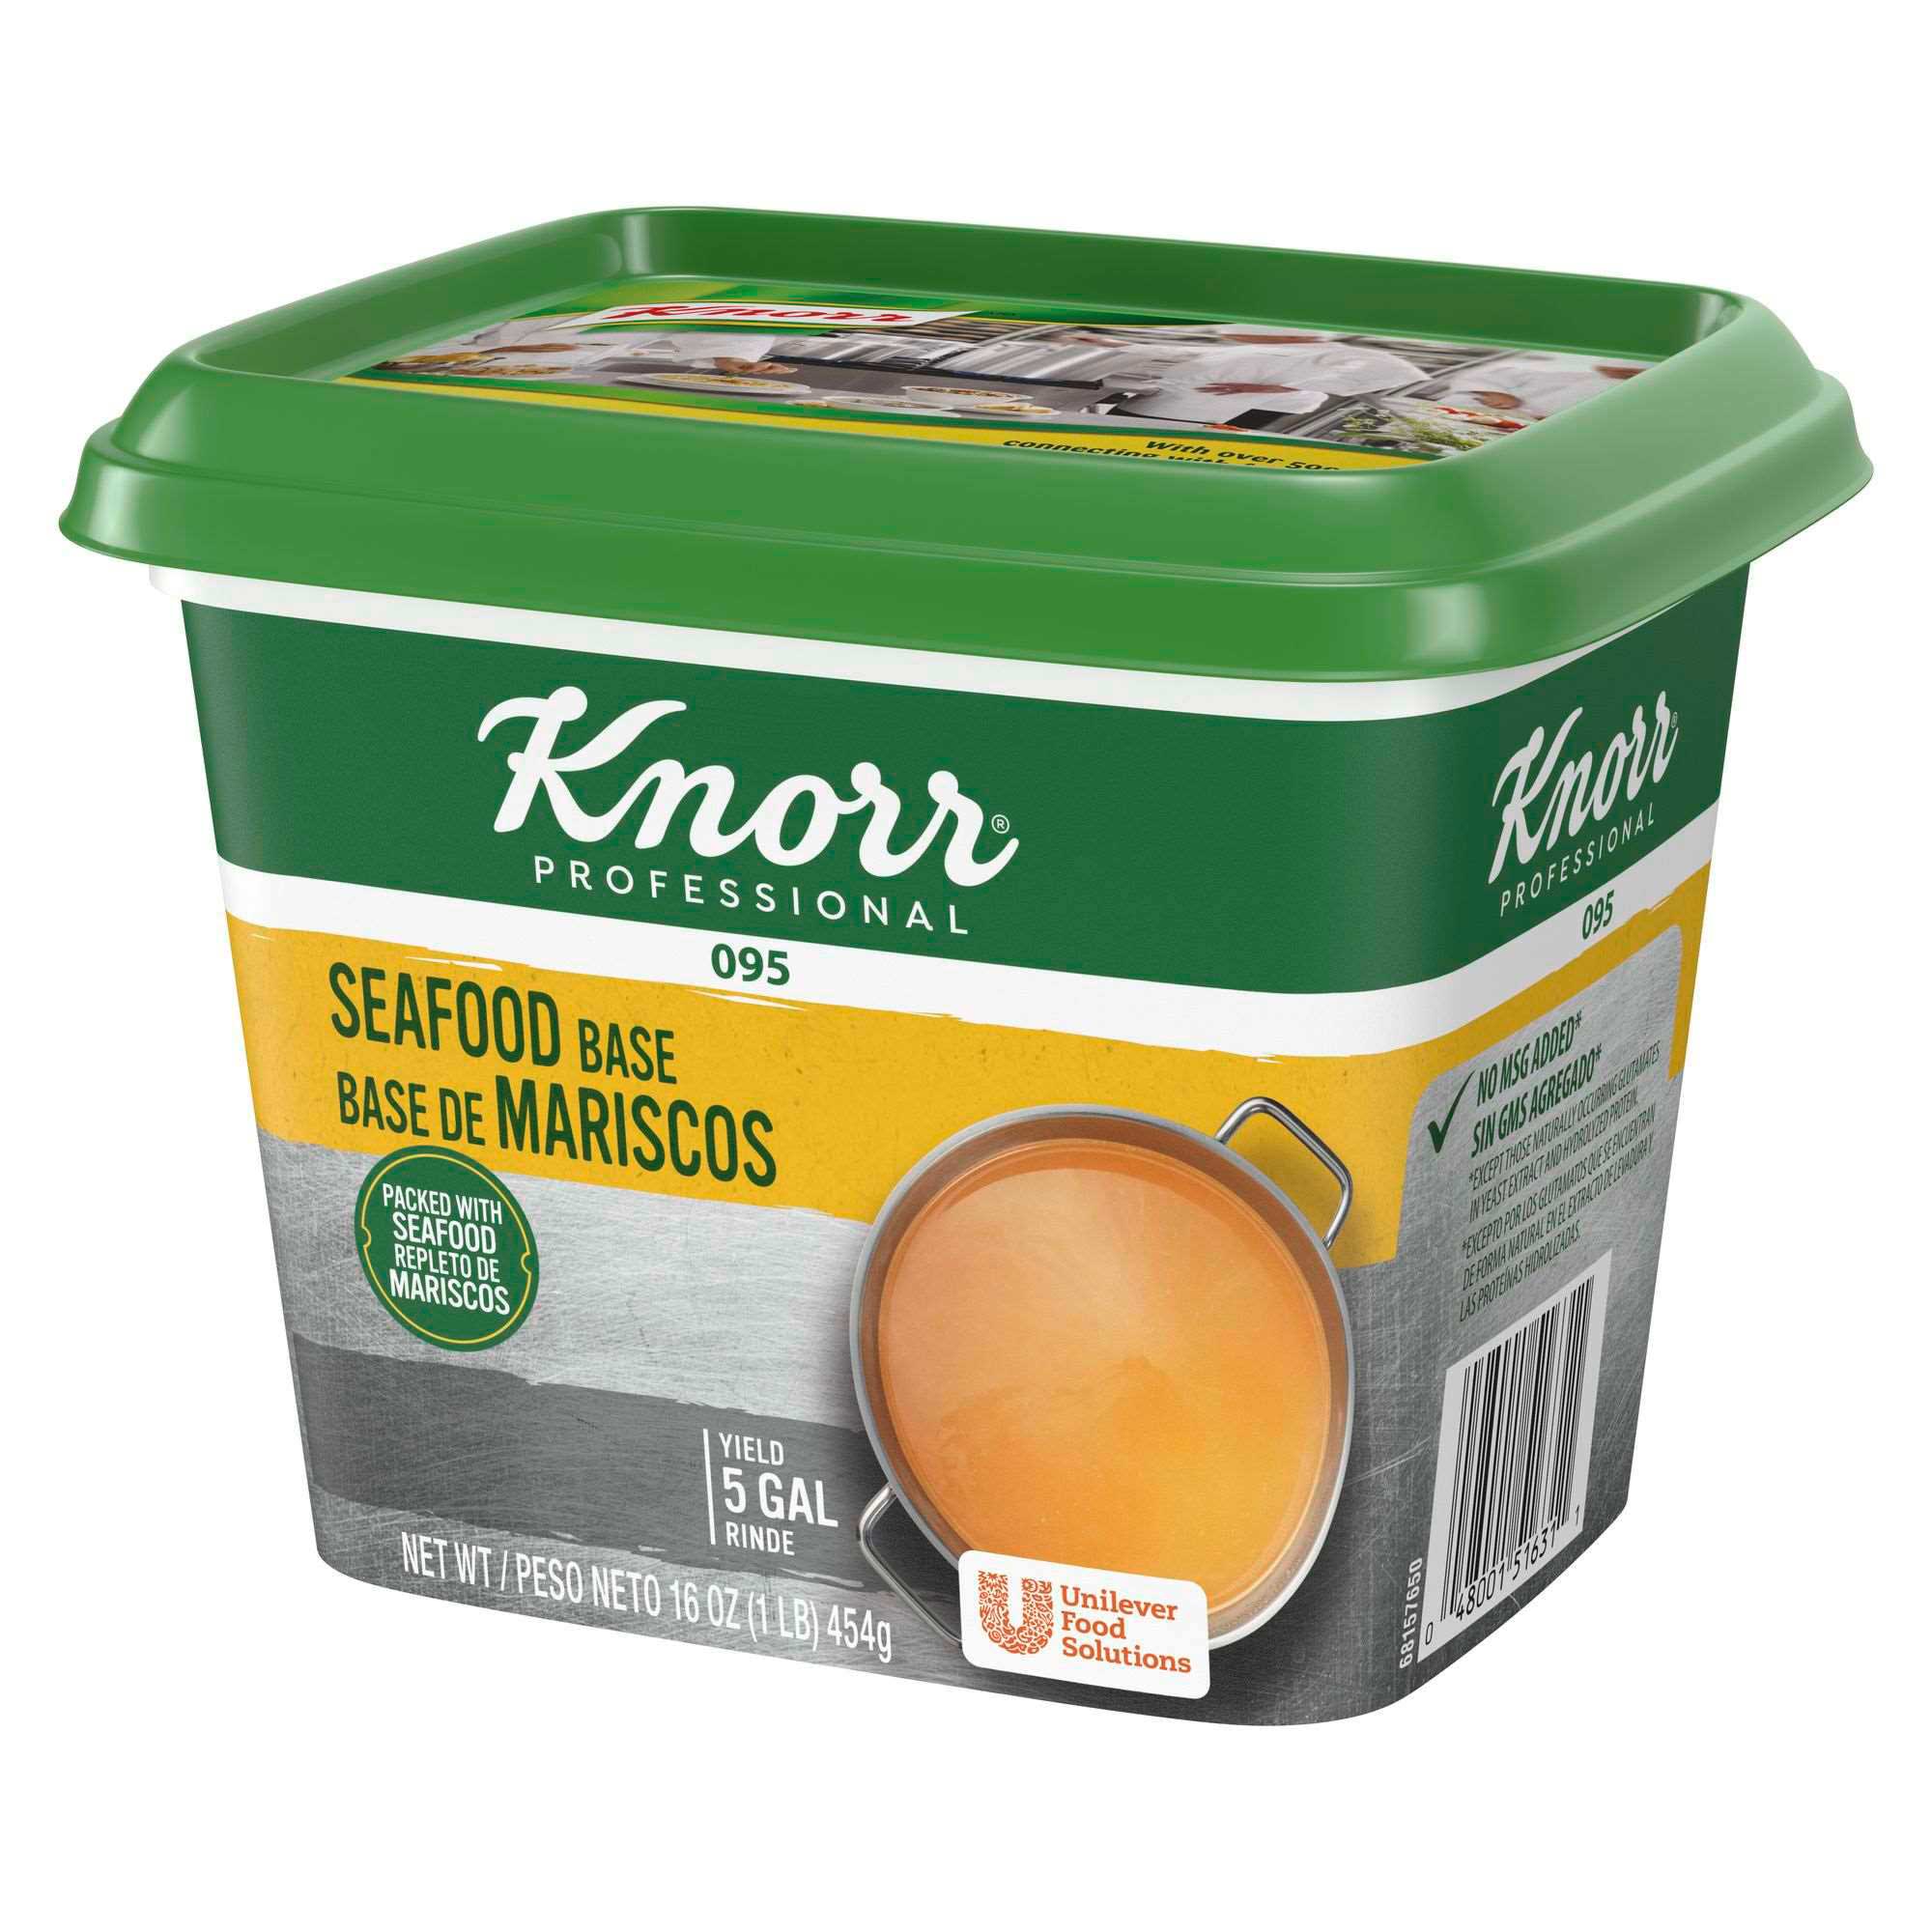 Knorr Professional 095 Seafood Stock Base, 1 pound -- 6 per case